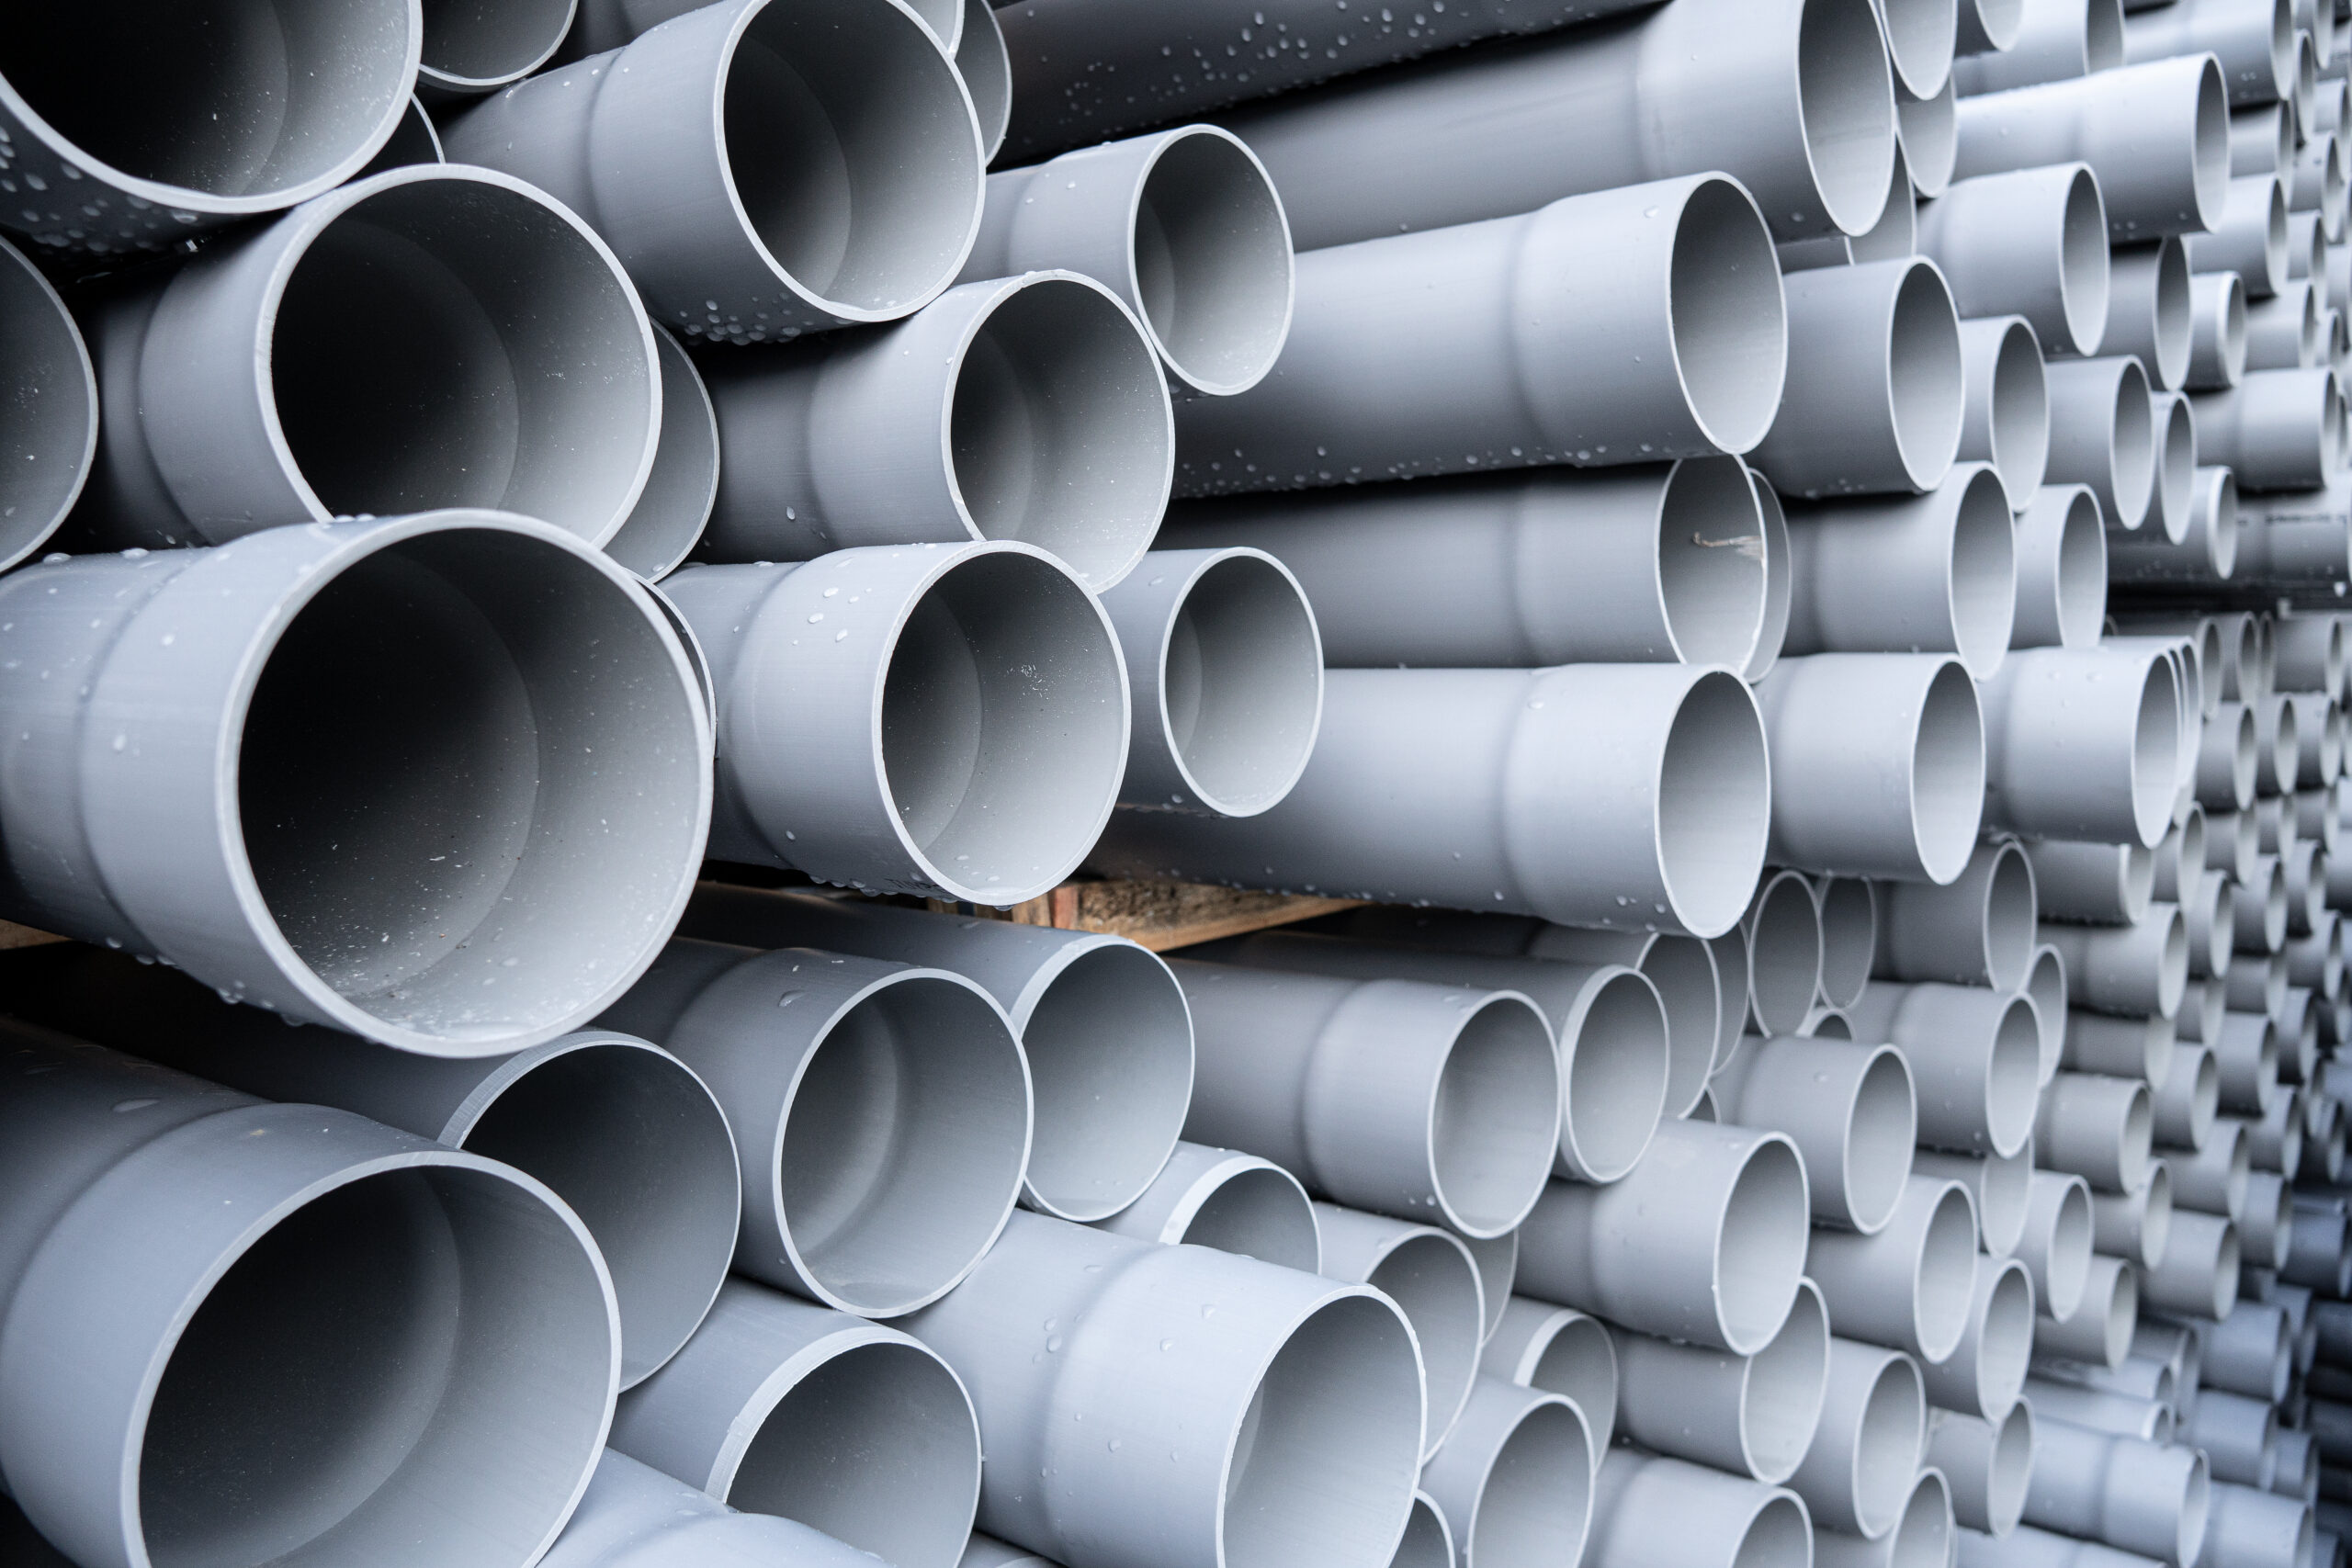 A collection of fabricated PVC pipes holding hoses